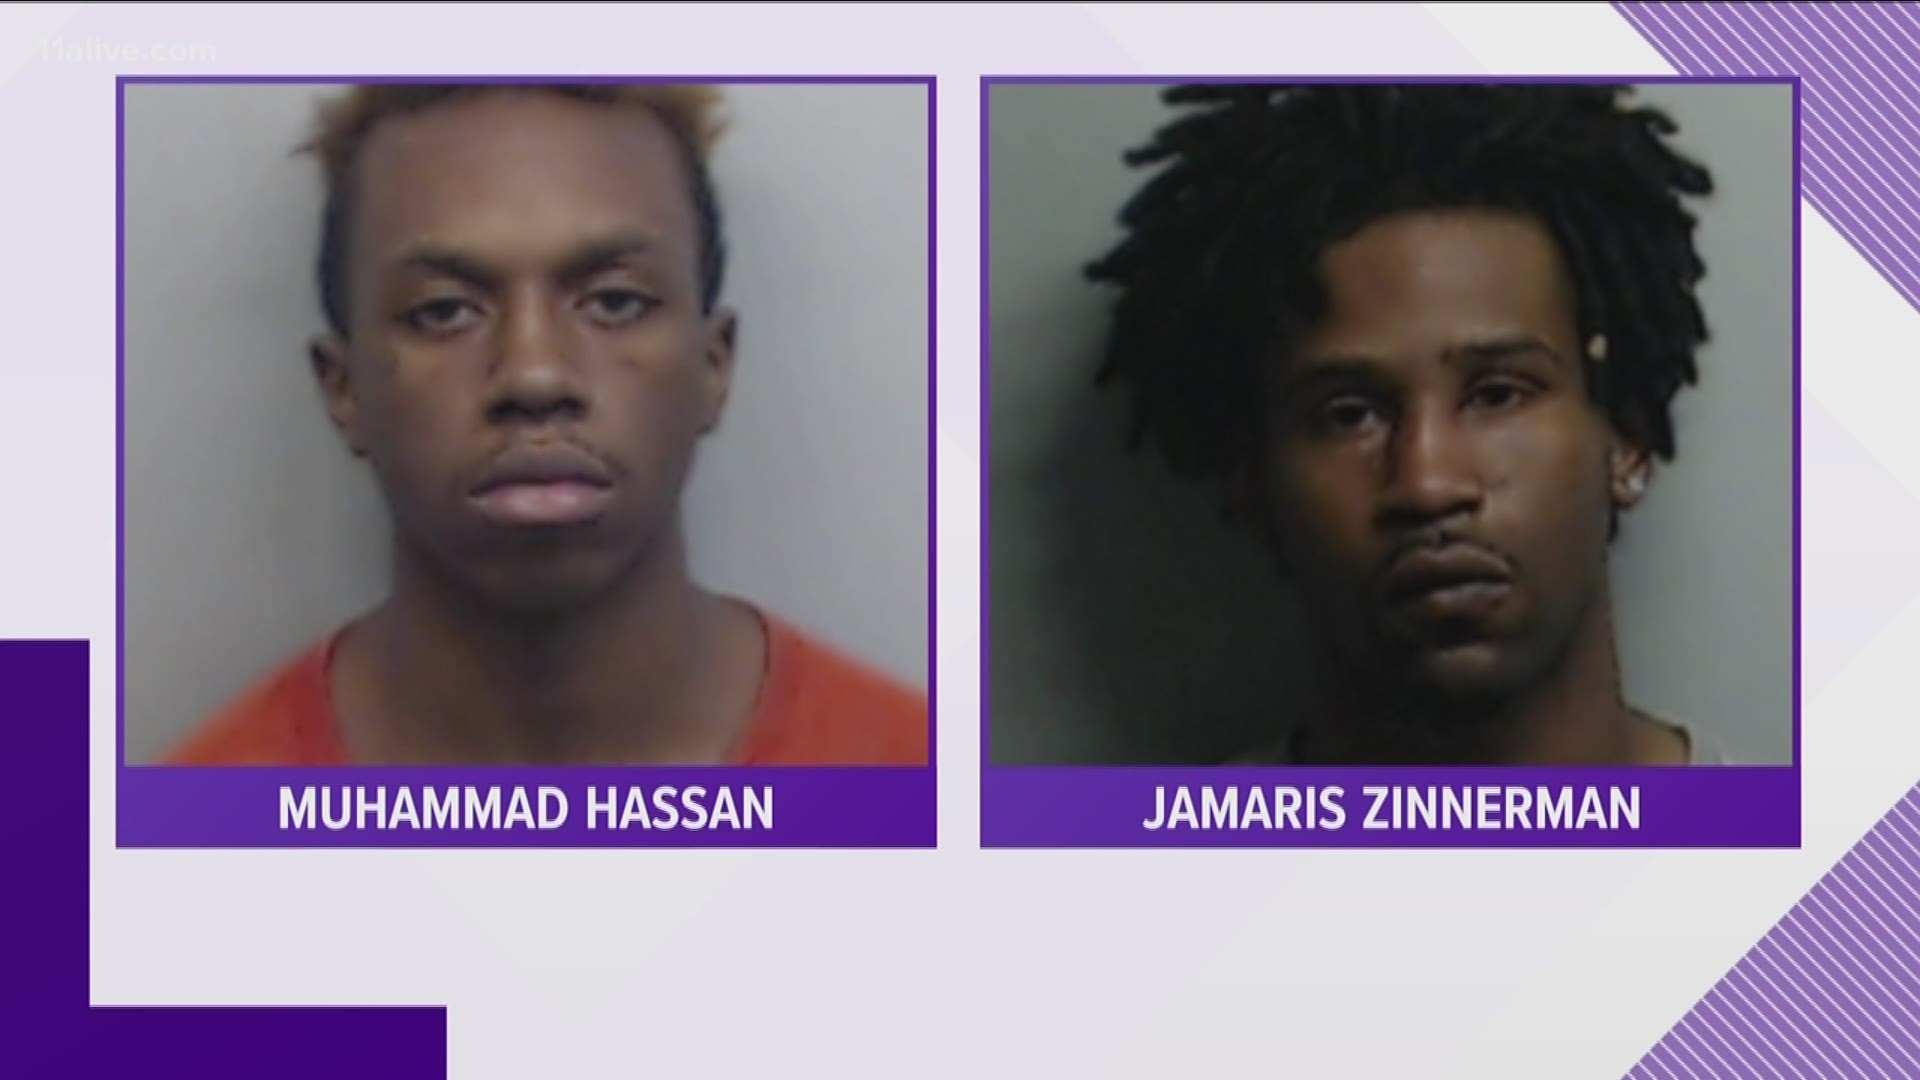 Zinnerman and Hassan were sentenced to  
Life in Prison plus 25 Years.